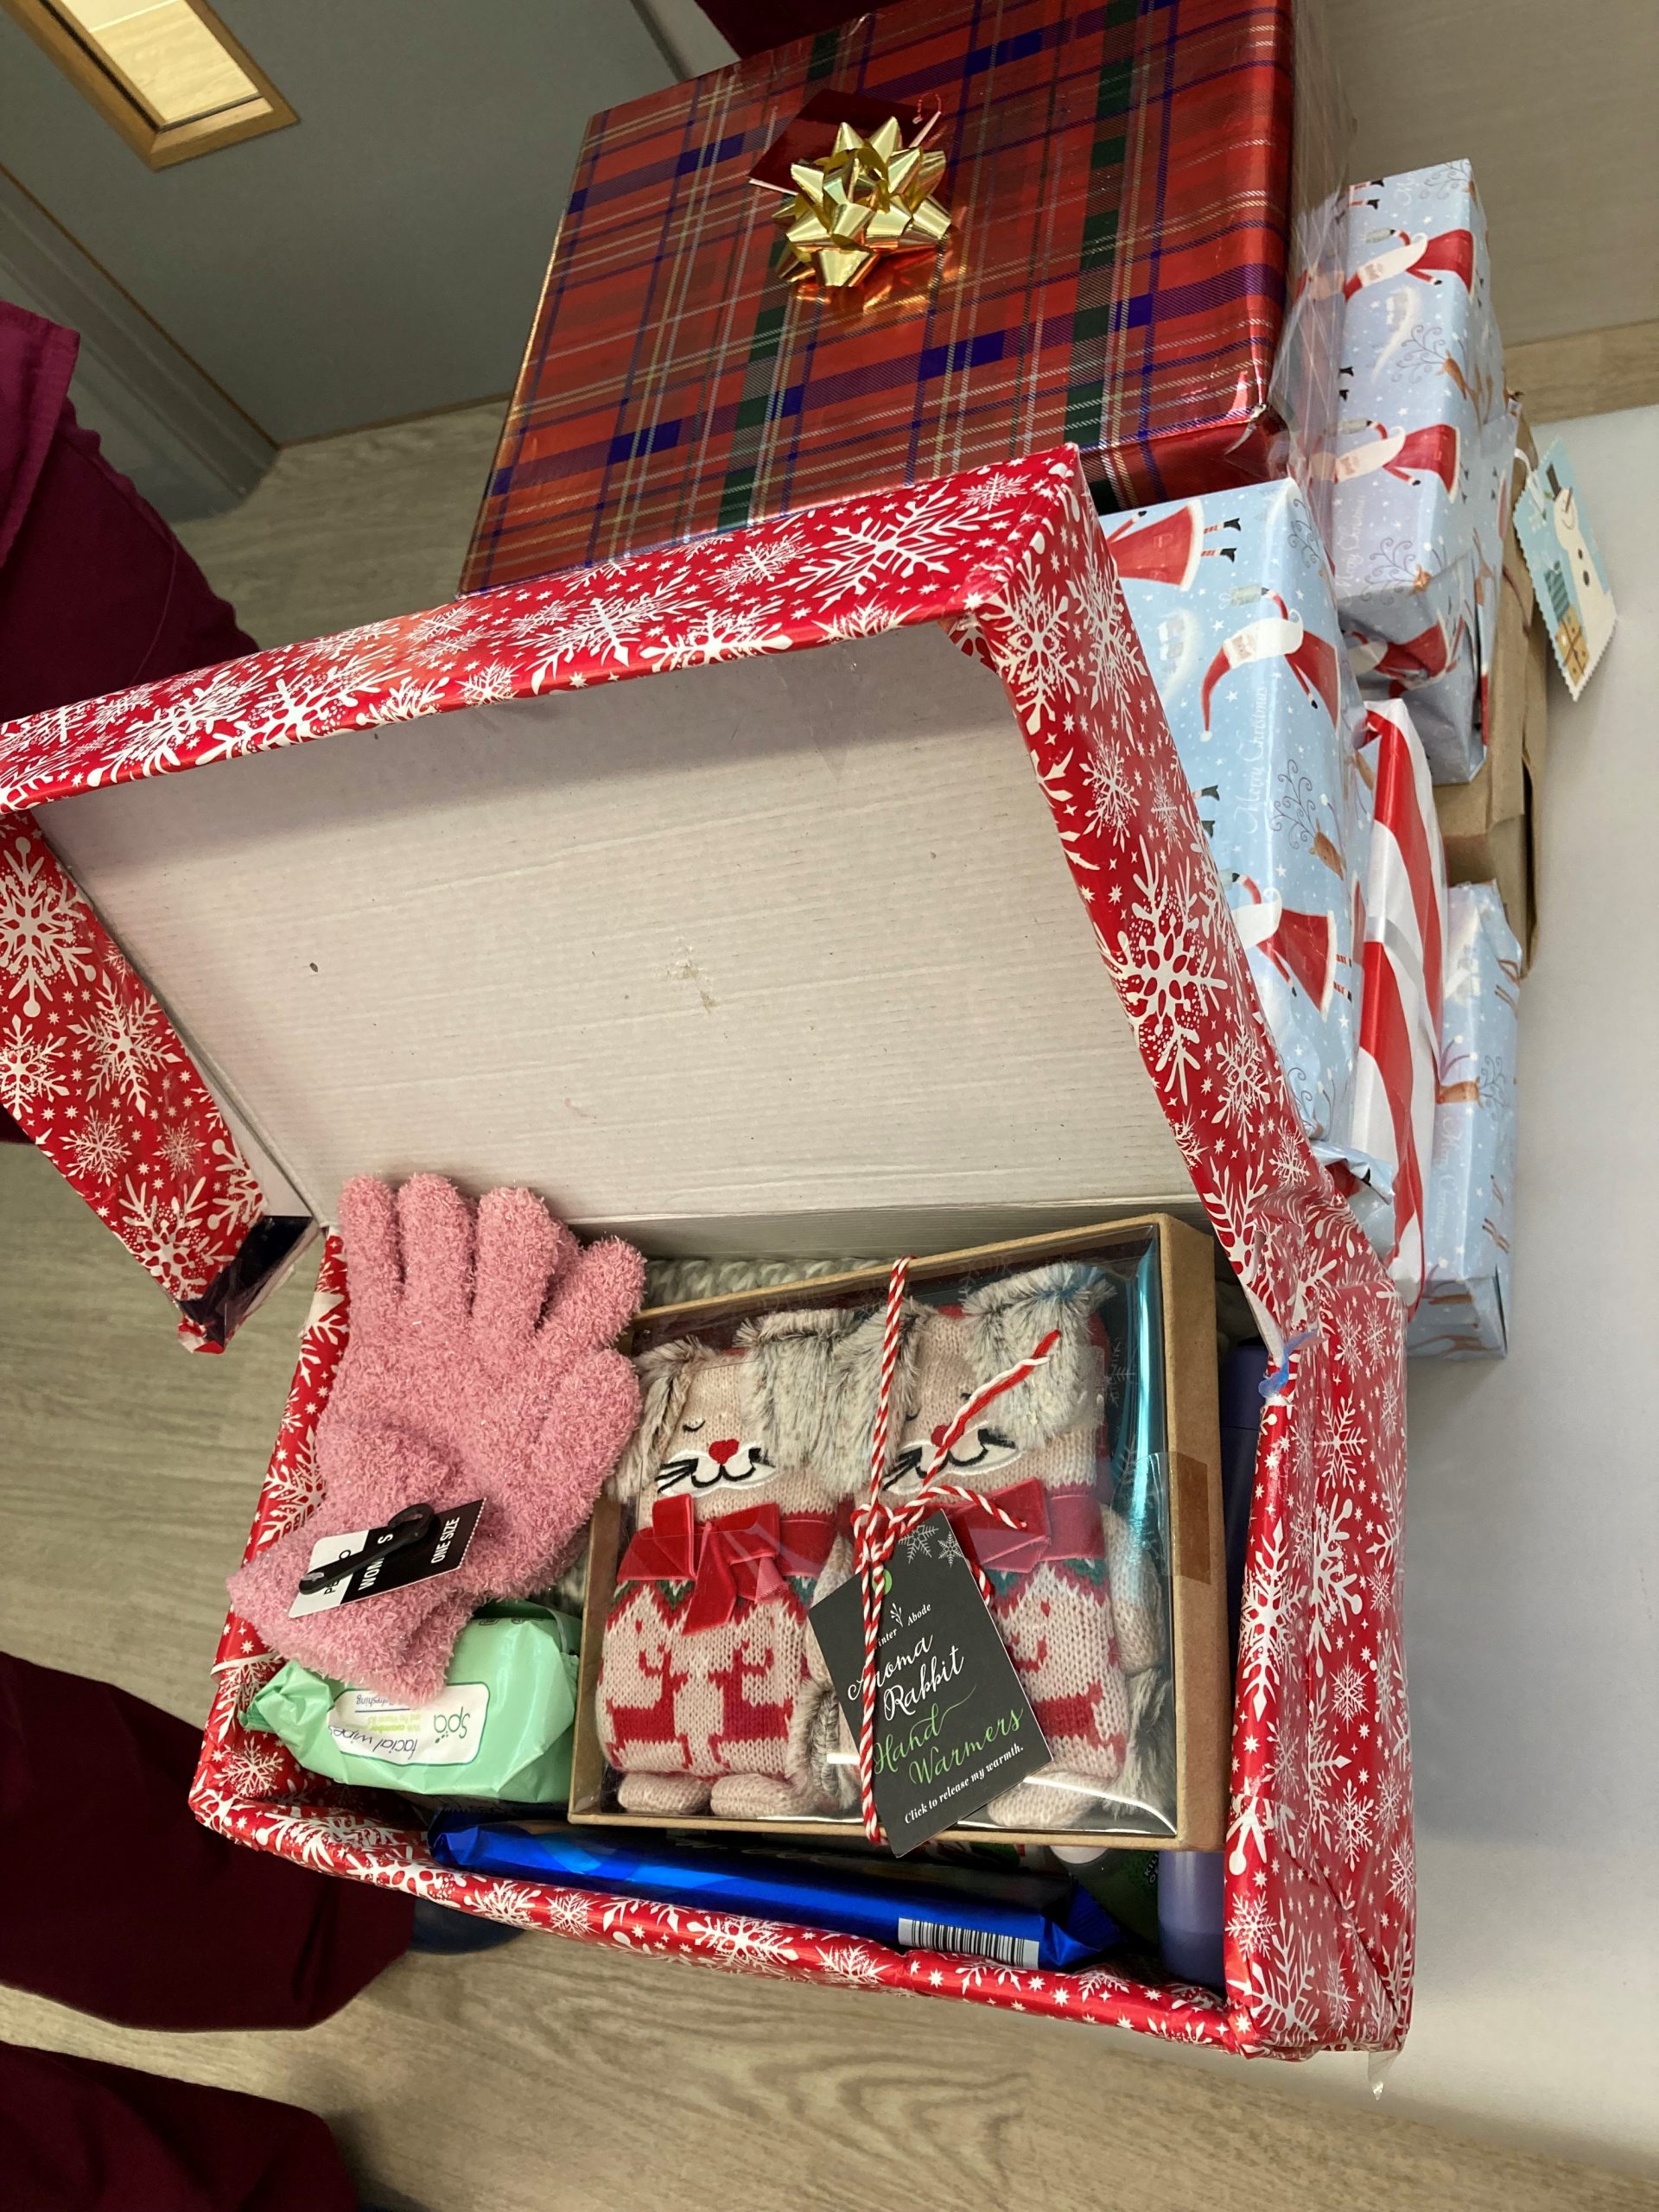 Shoeboxes containing items for donation to homeless people